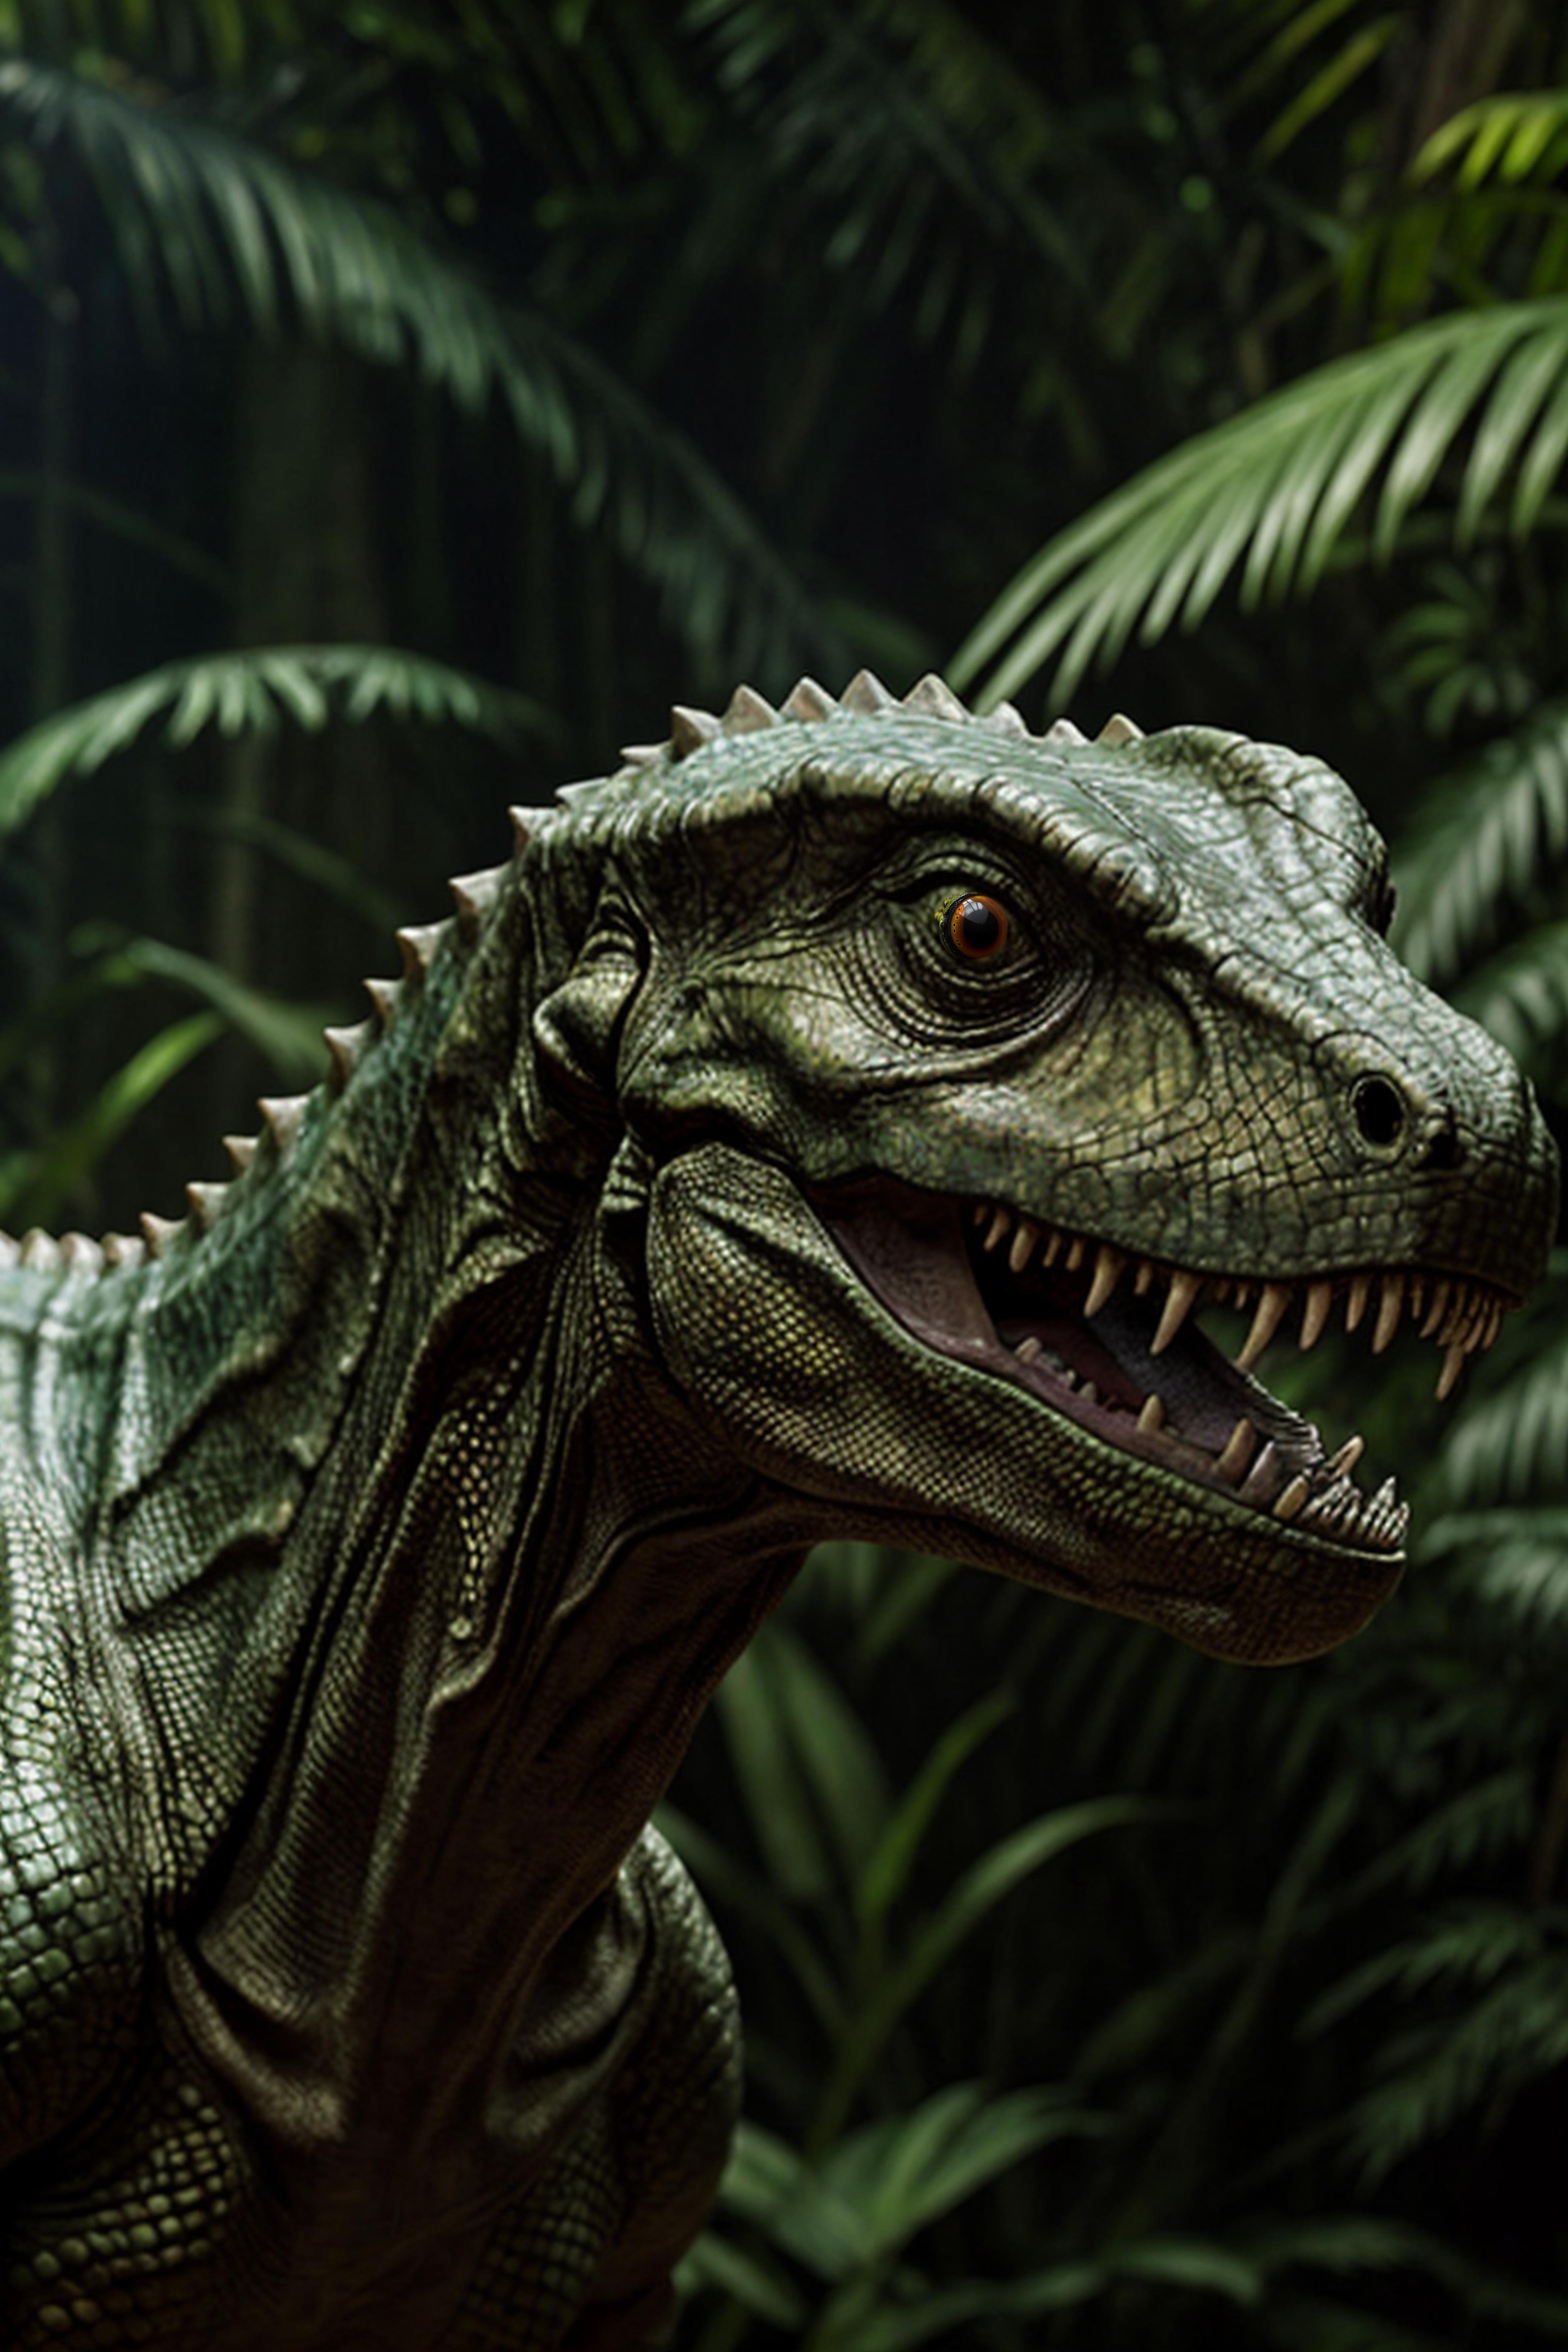 A close-up of a green dinosaur with a long snout and sharp teeth.